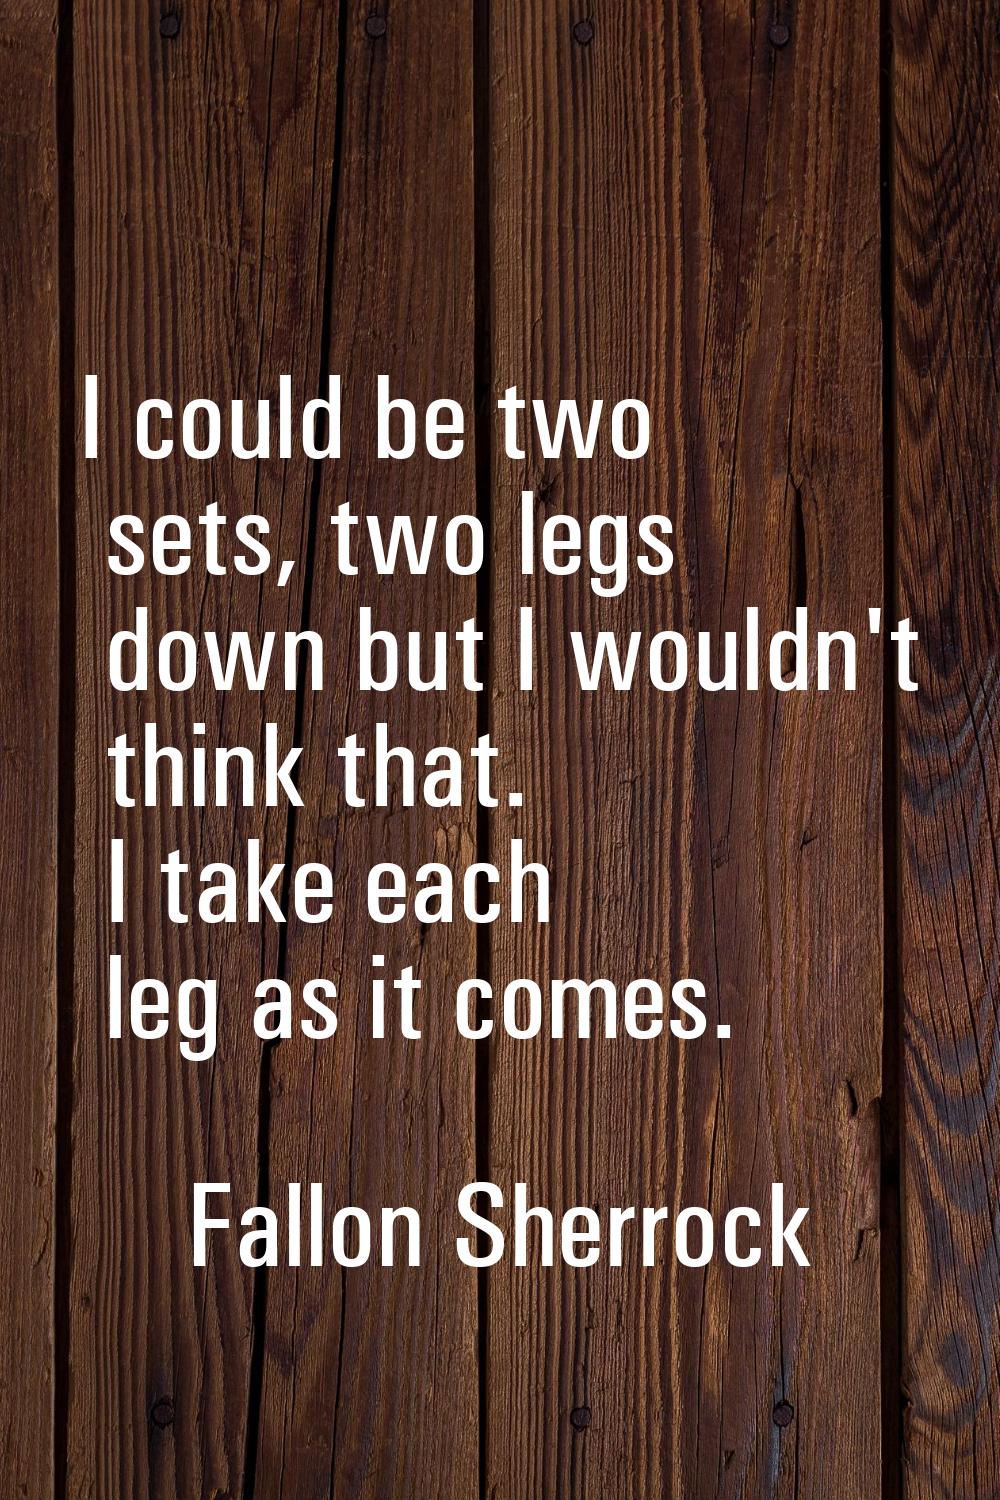 I could be two sets, two legs down but I wouldn't think that. I take each leg as it comes.